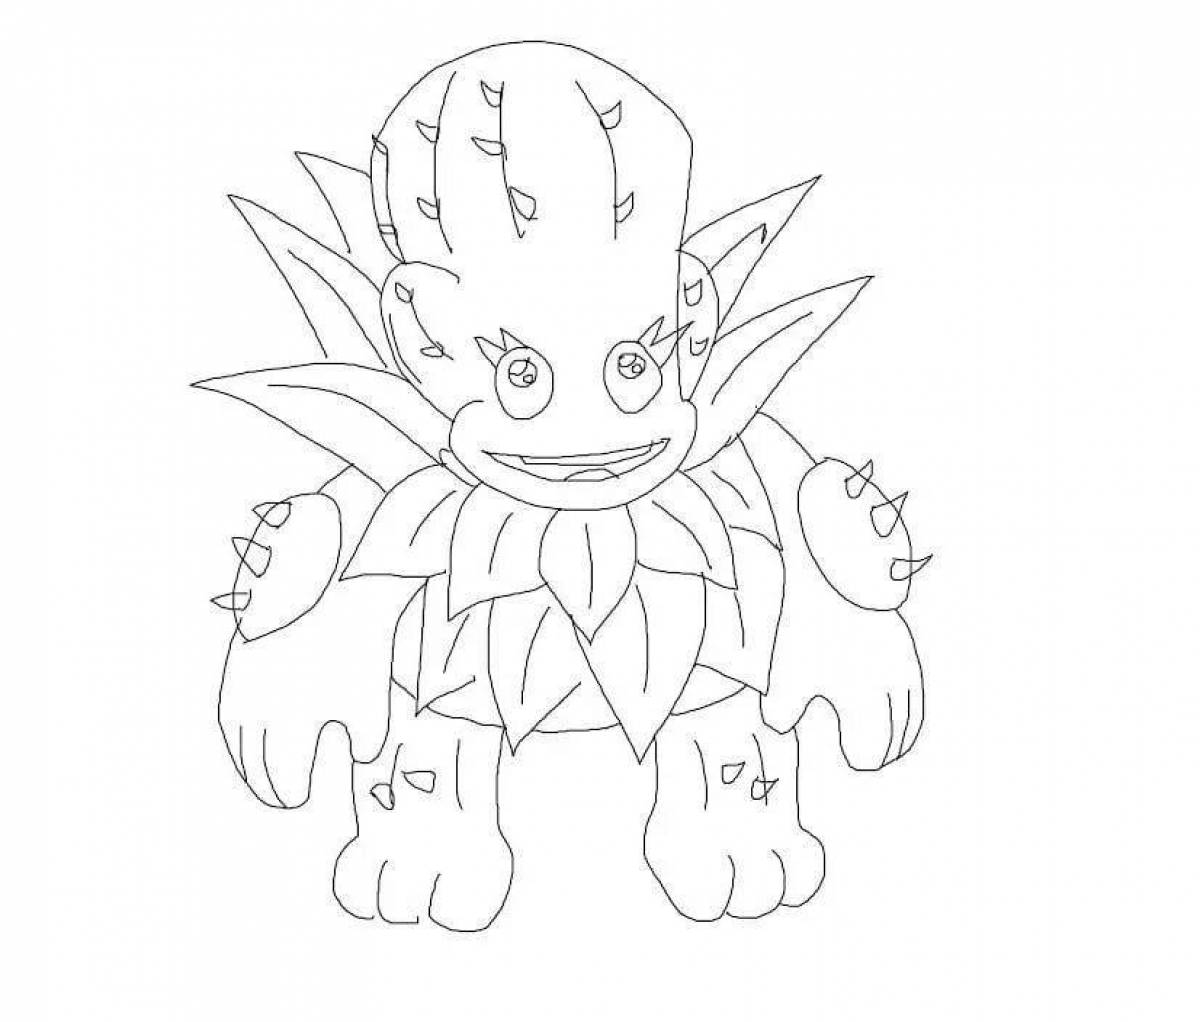 Vivacious mai singing monster coloring page